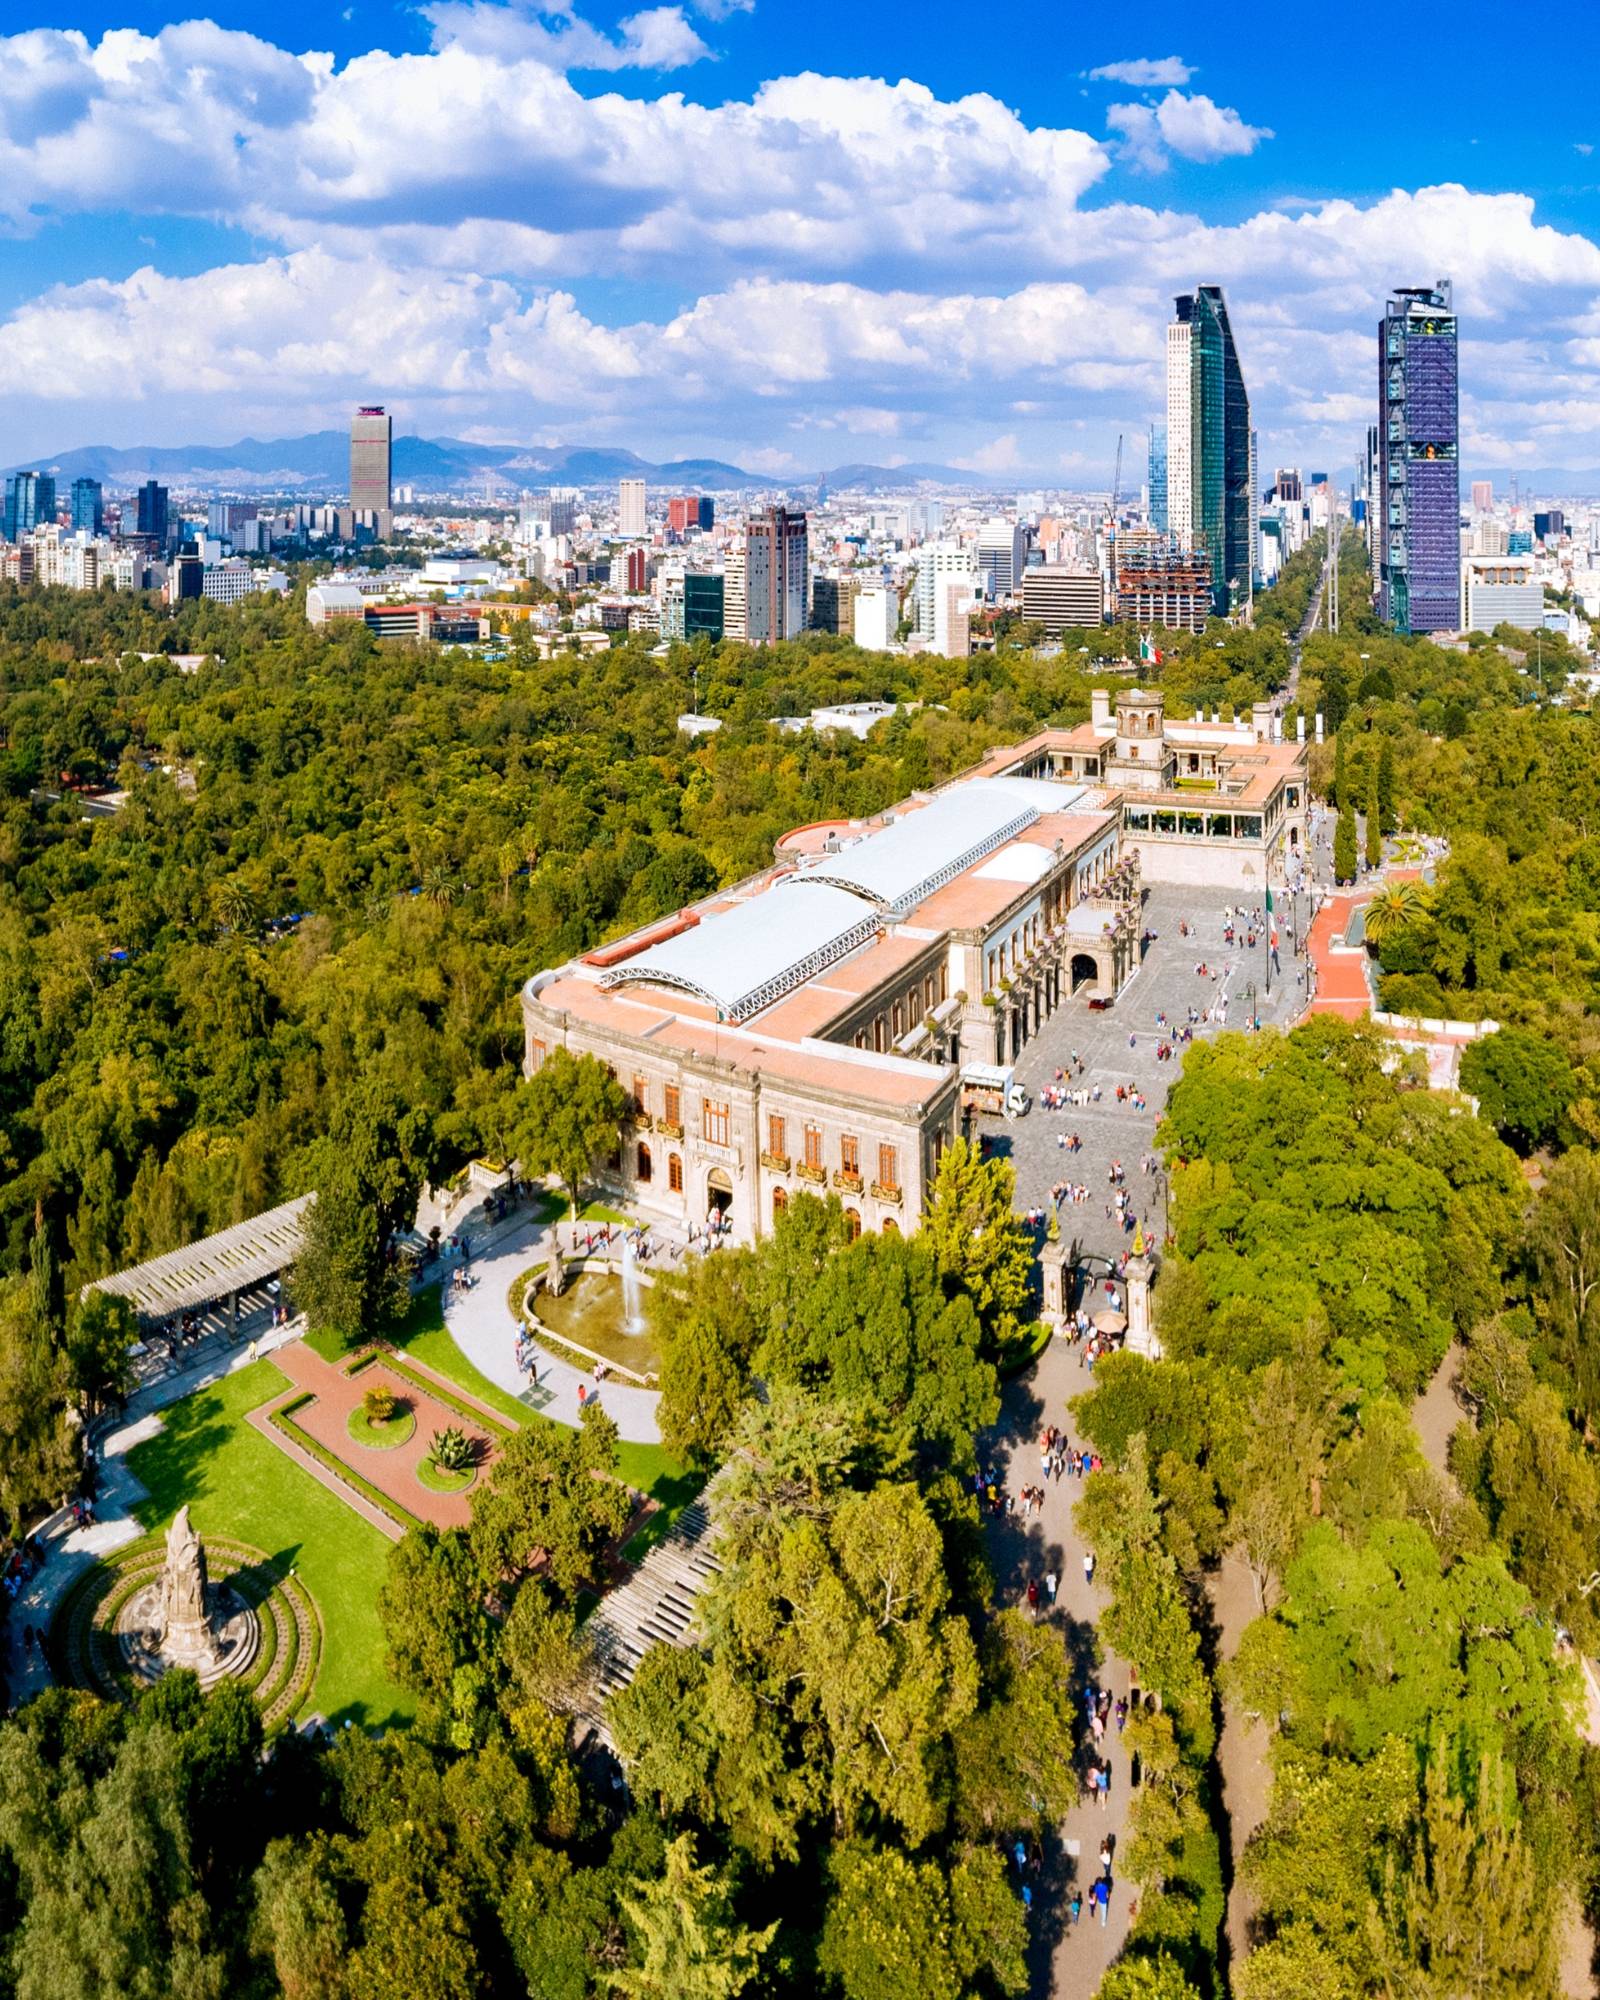 An image of Mexico City gardens and city